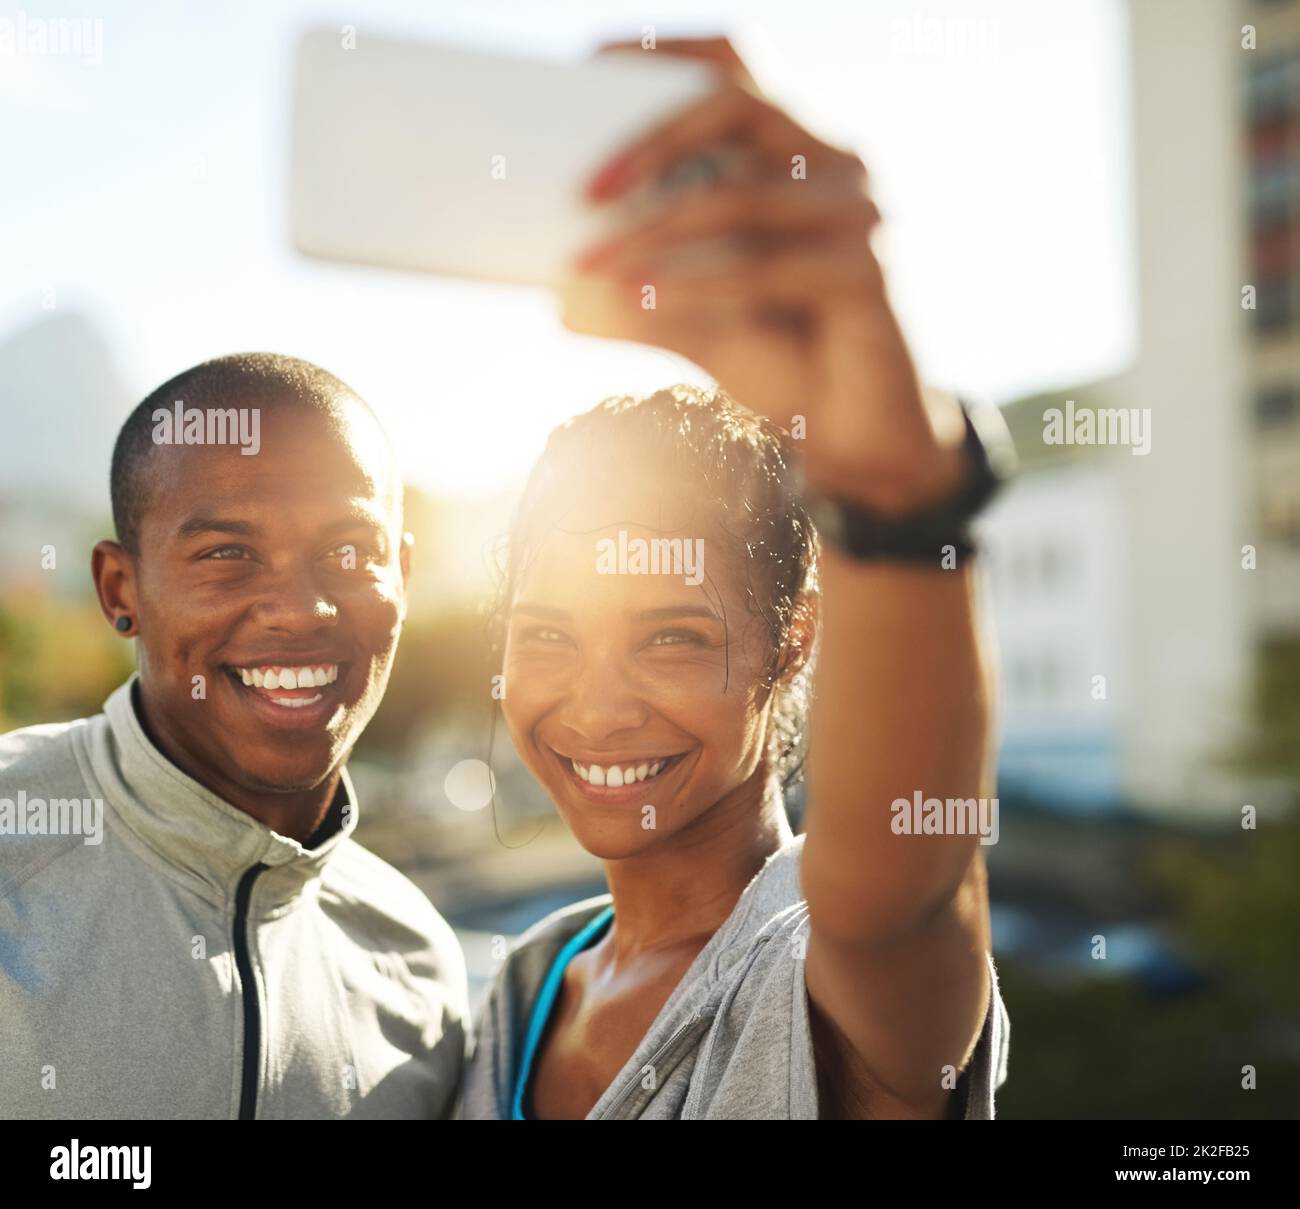 Vibrant with vitality. Shot of a young sporty couple taking a photo together with a cellphone. Stock Photo